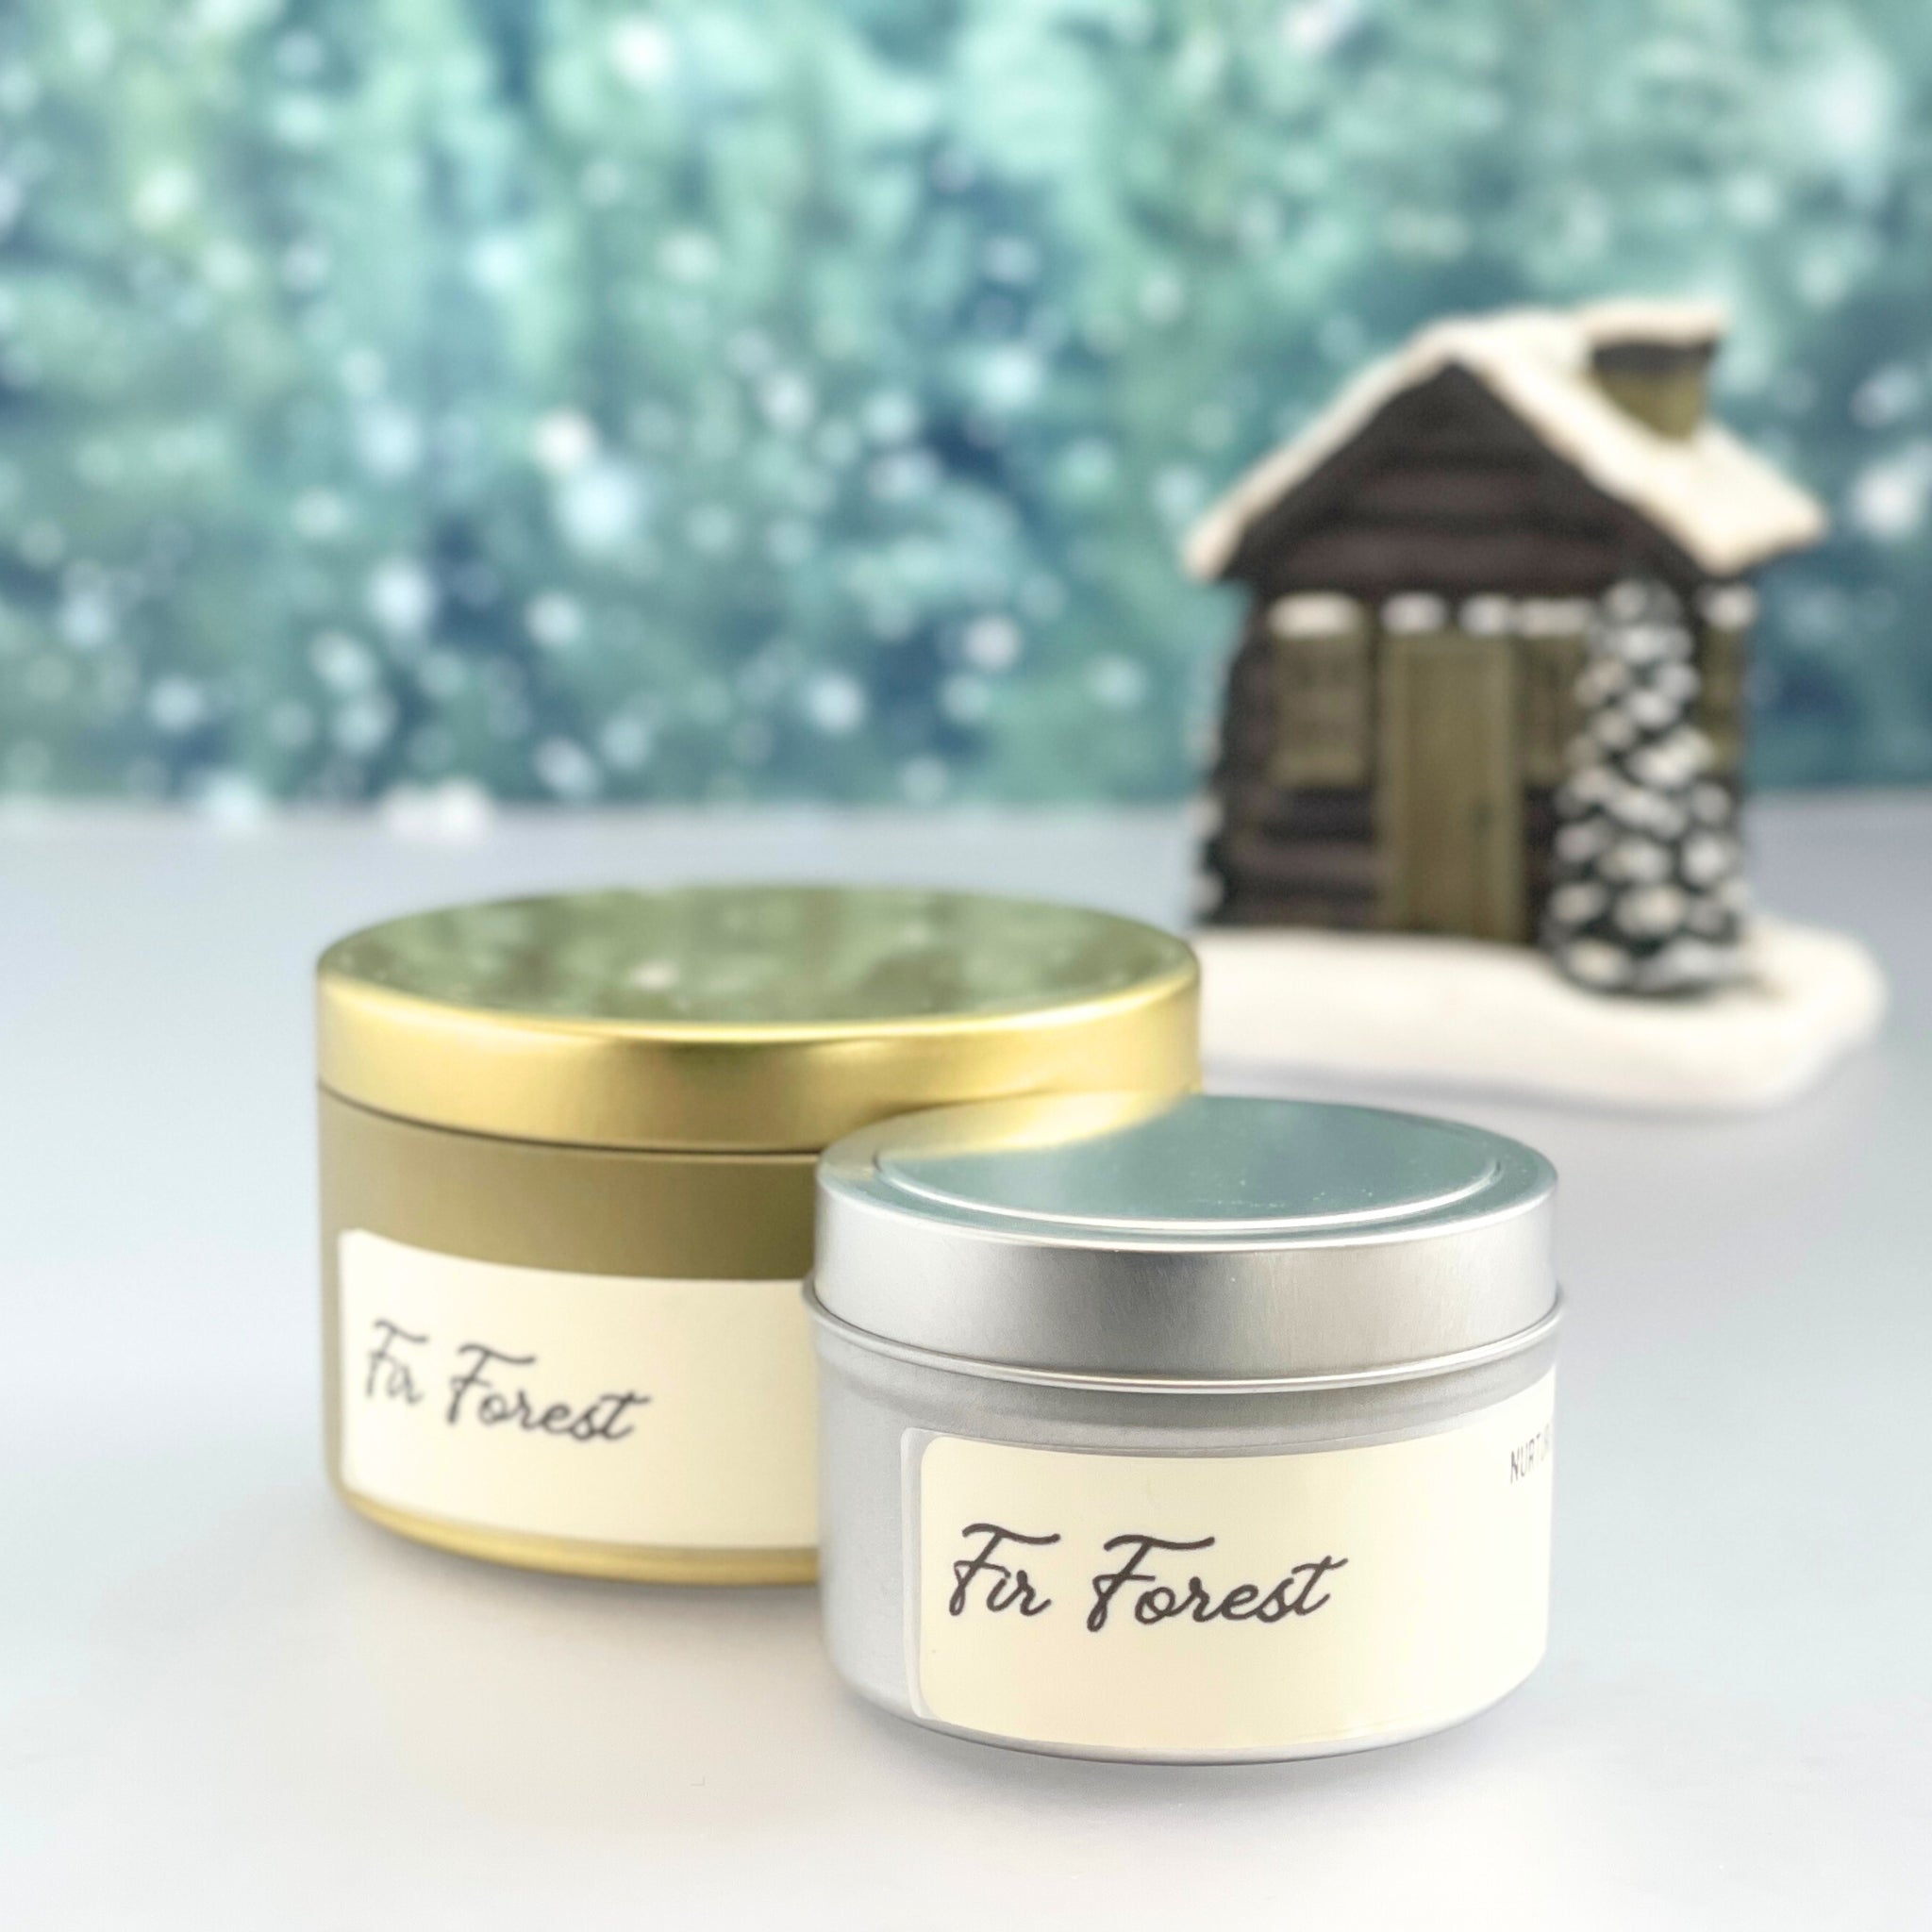 Fir Forest 🌲 Soy Wax Candle